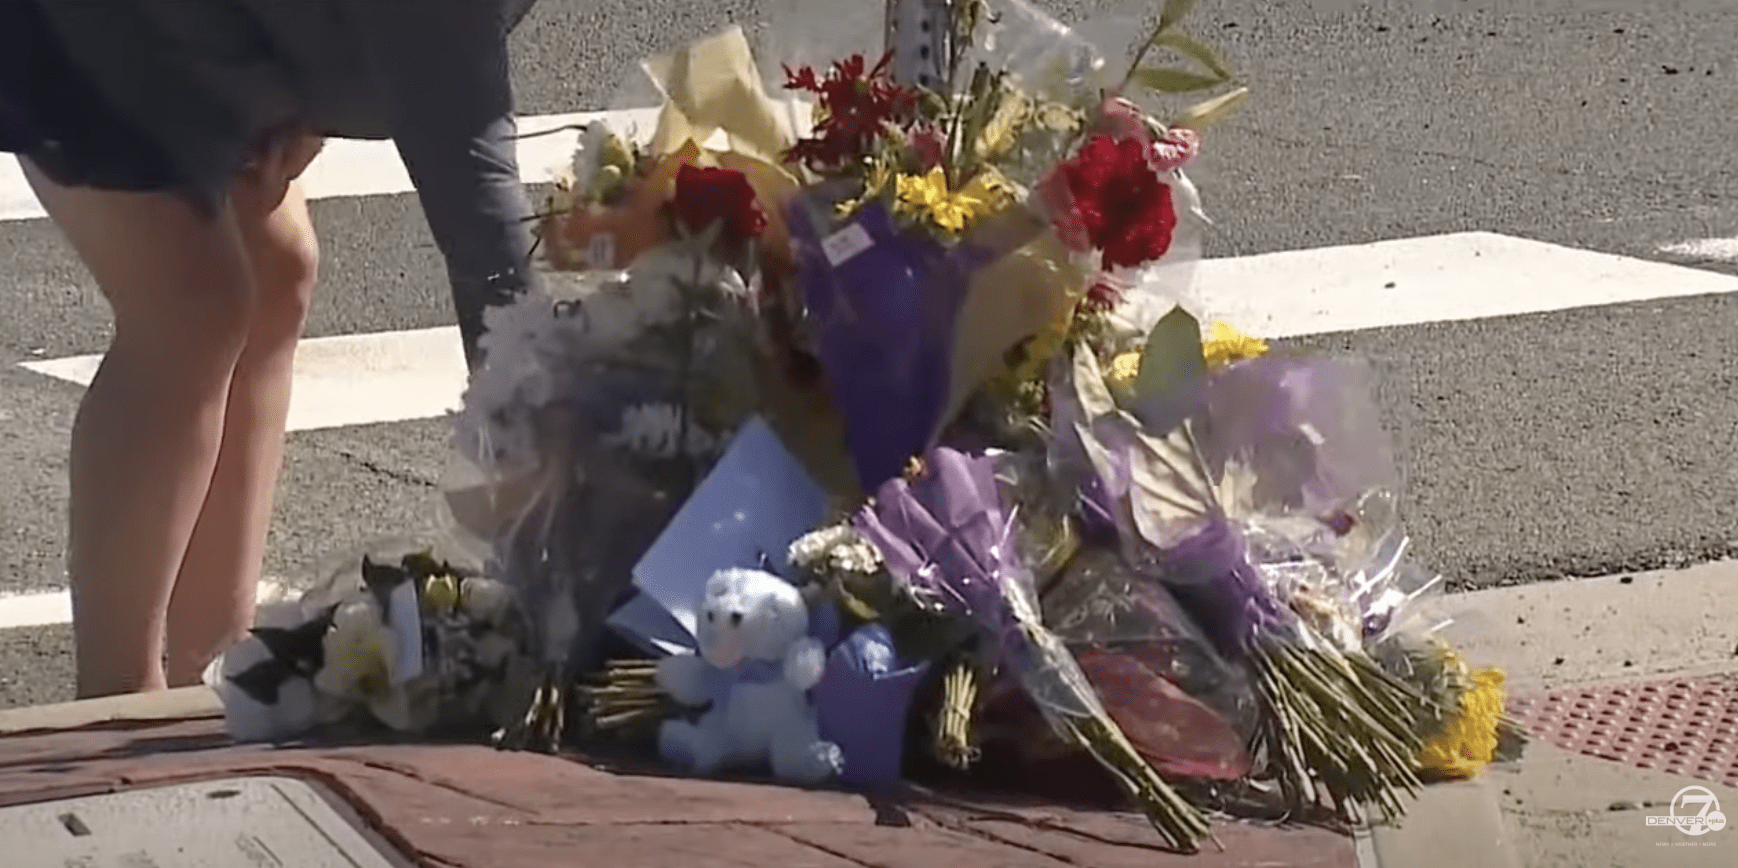 People leave flowers, stuffed toys, and touching notes for Austin in the median. | Source: YouTube.com/Denver 7 — The Denver Channel